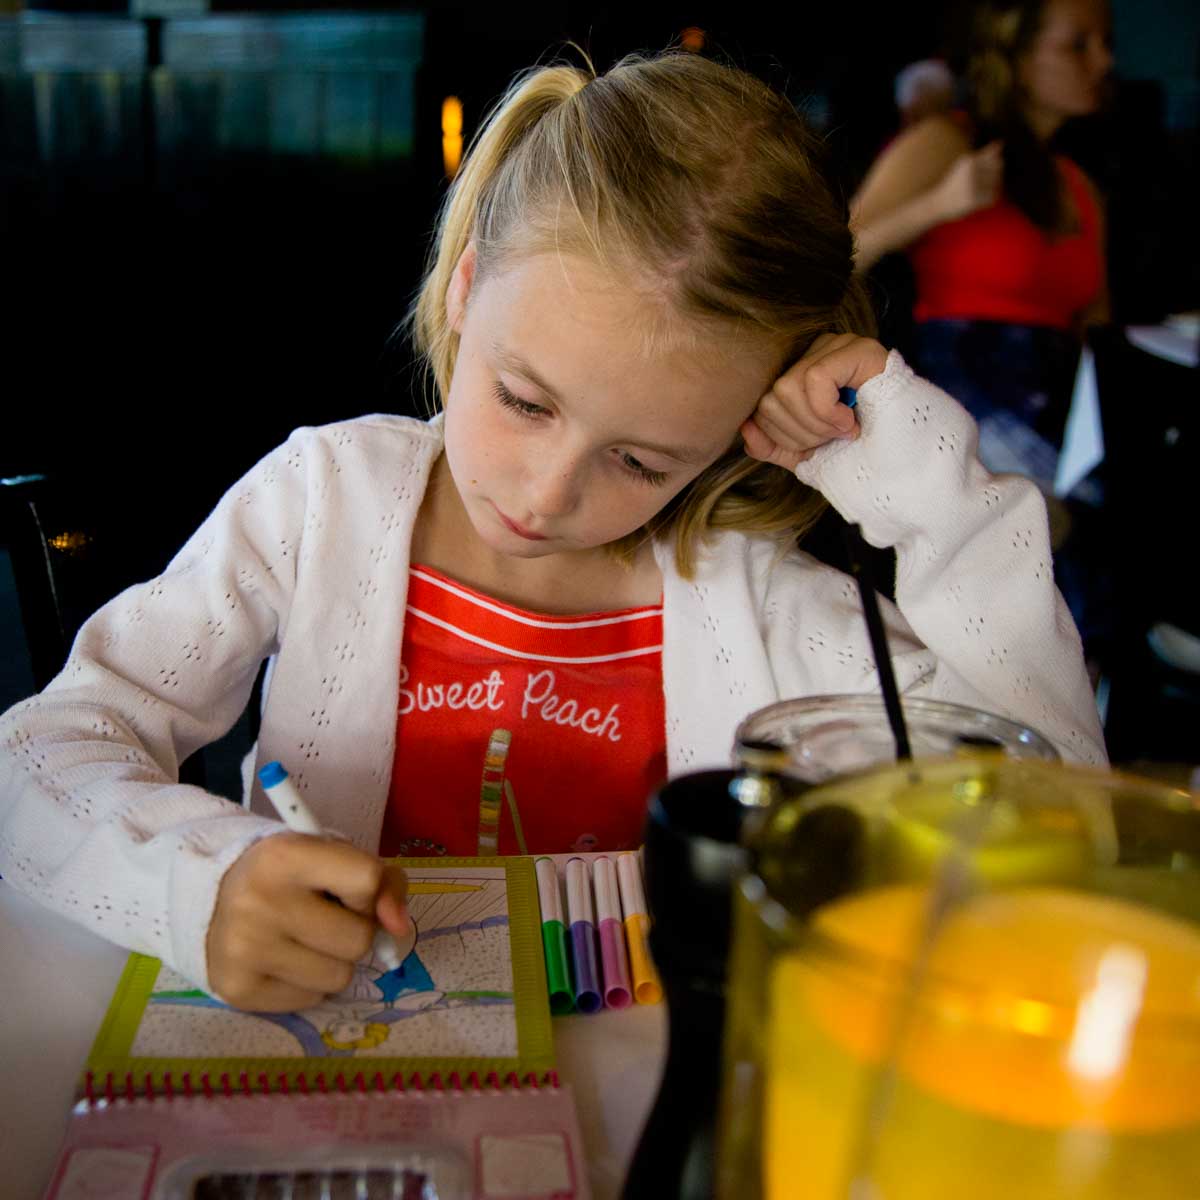 A young girl colors at a restaurant table.